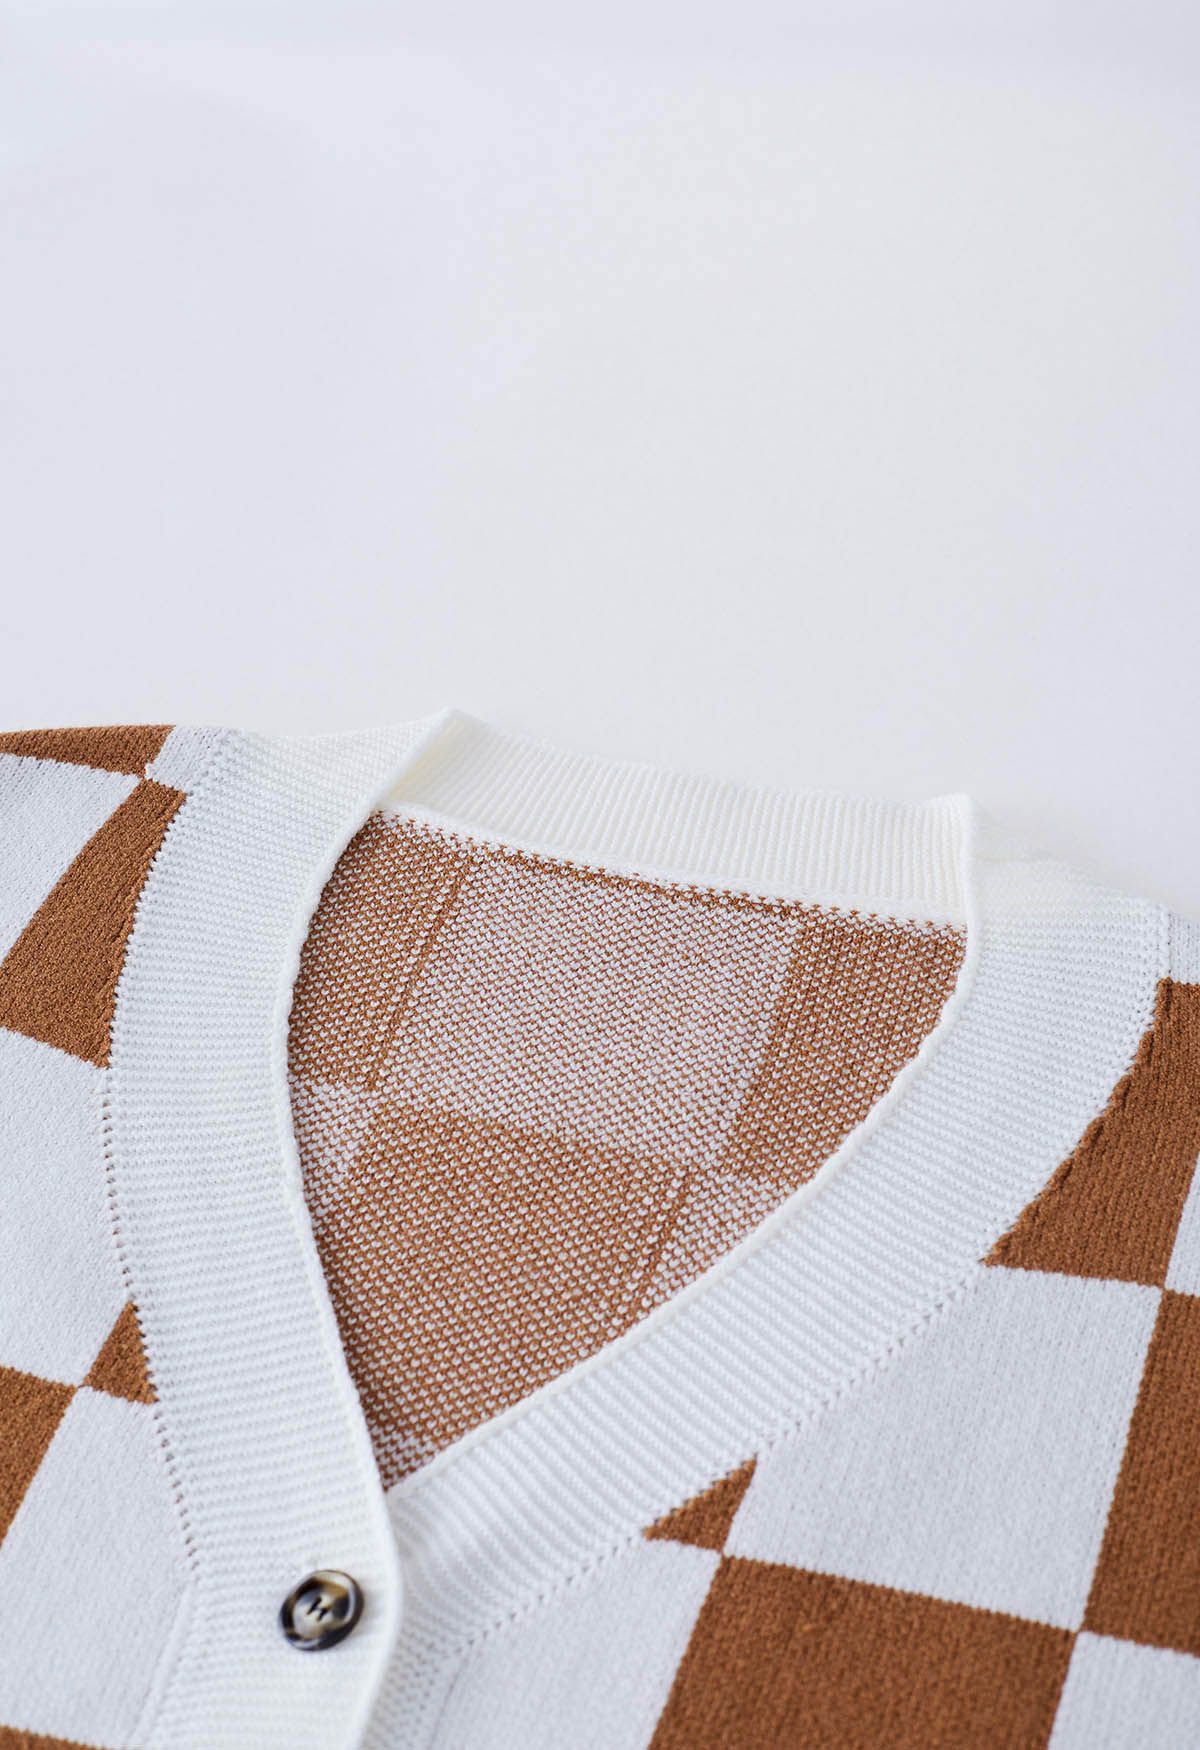 Check Pattern V-Neck Button Down Cardigan in Camel